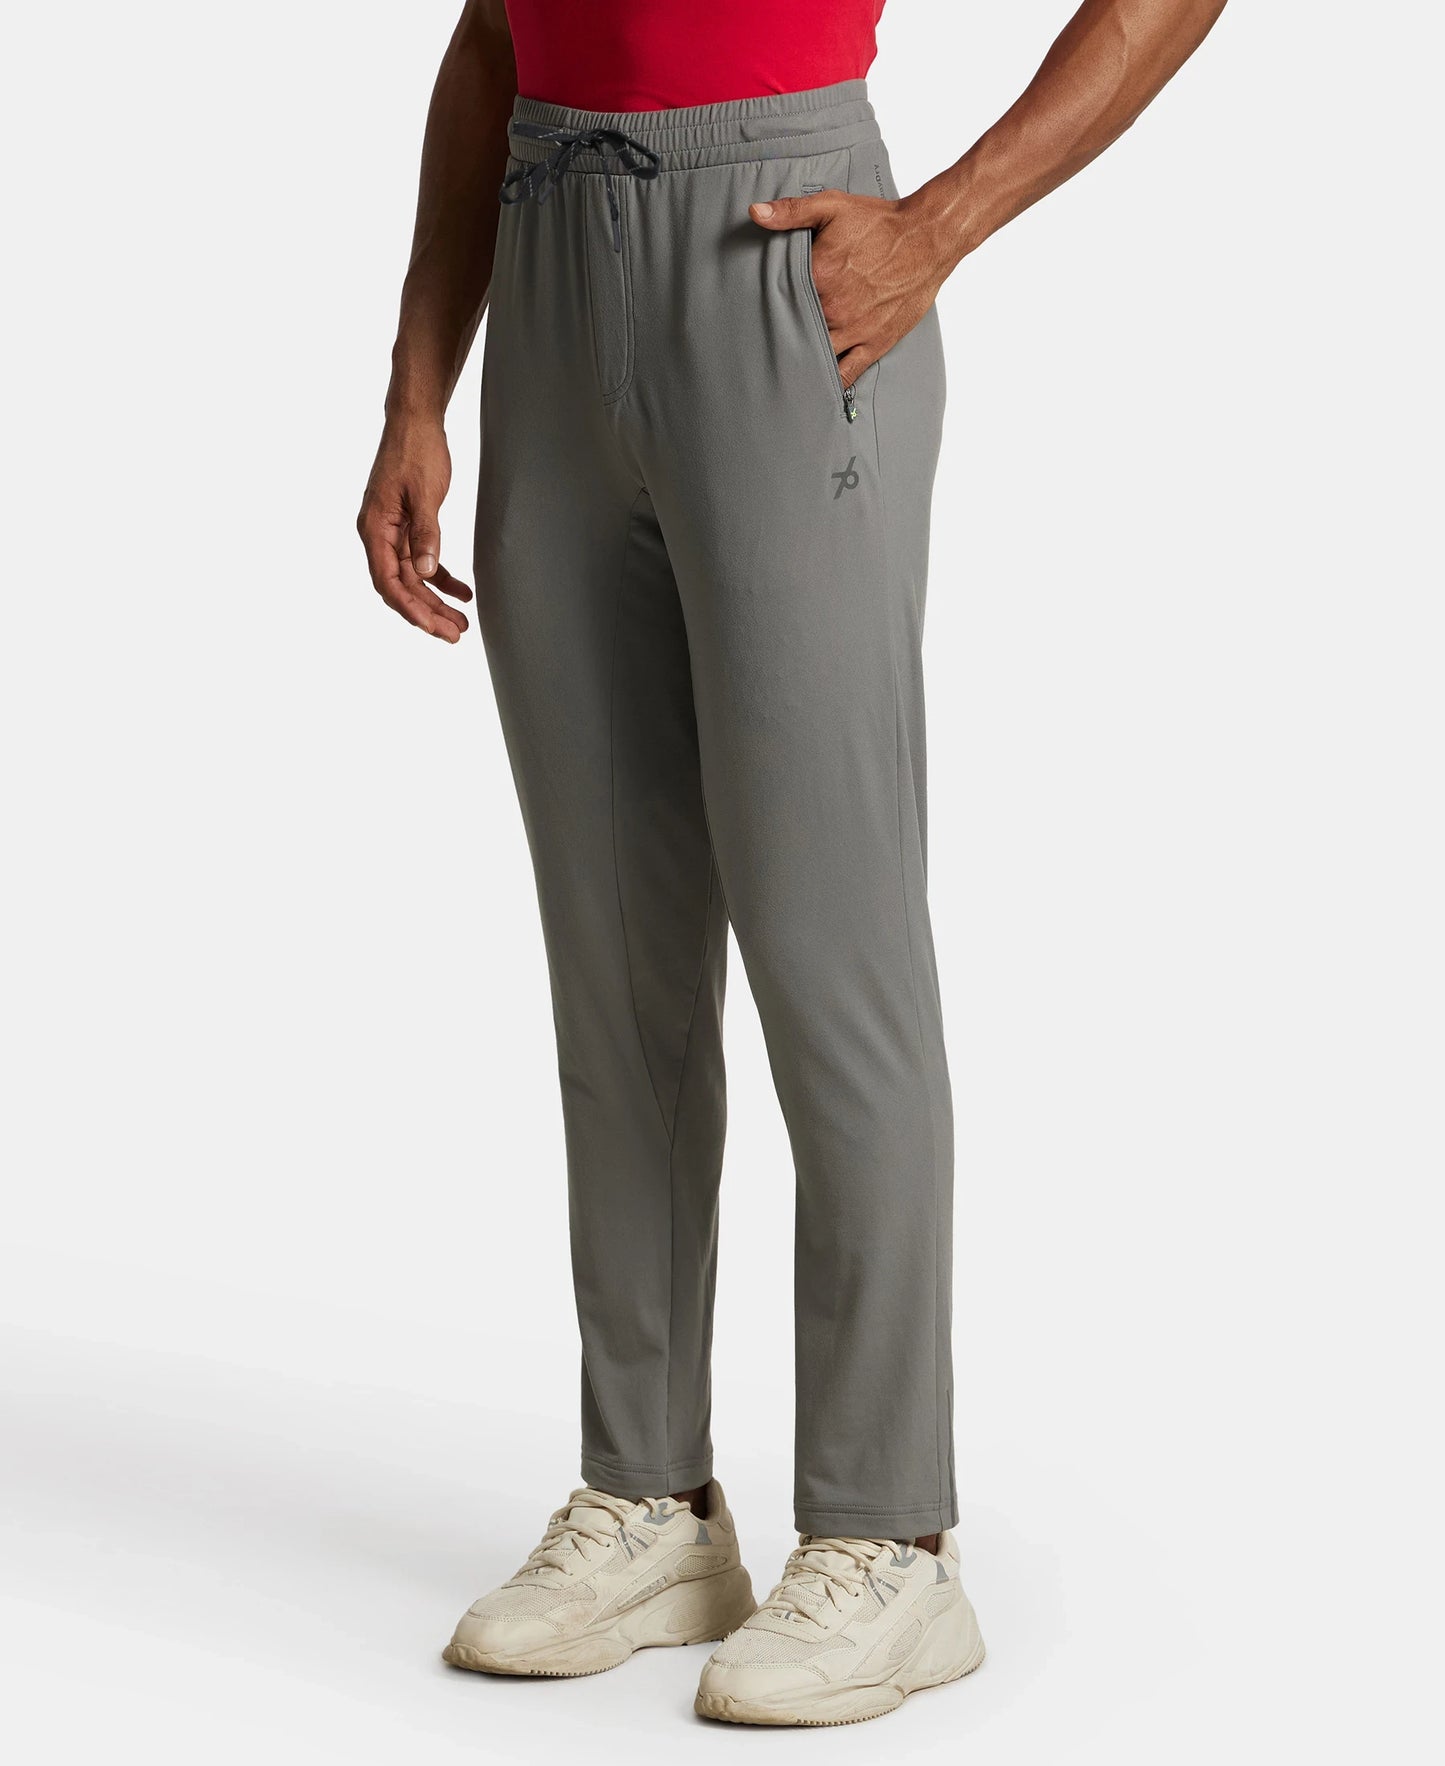 Soft Touch Microfiber Elastane Stretch Trackpant with Side Pockets and StayFresh Treatment - Performance Grey